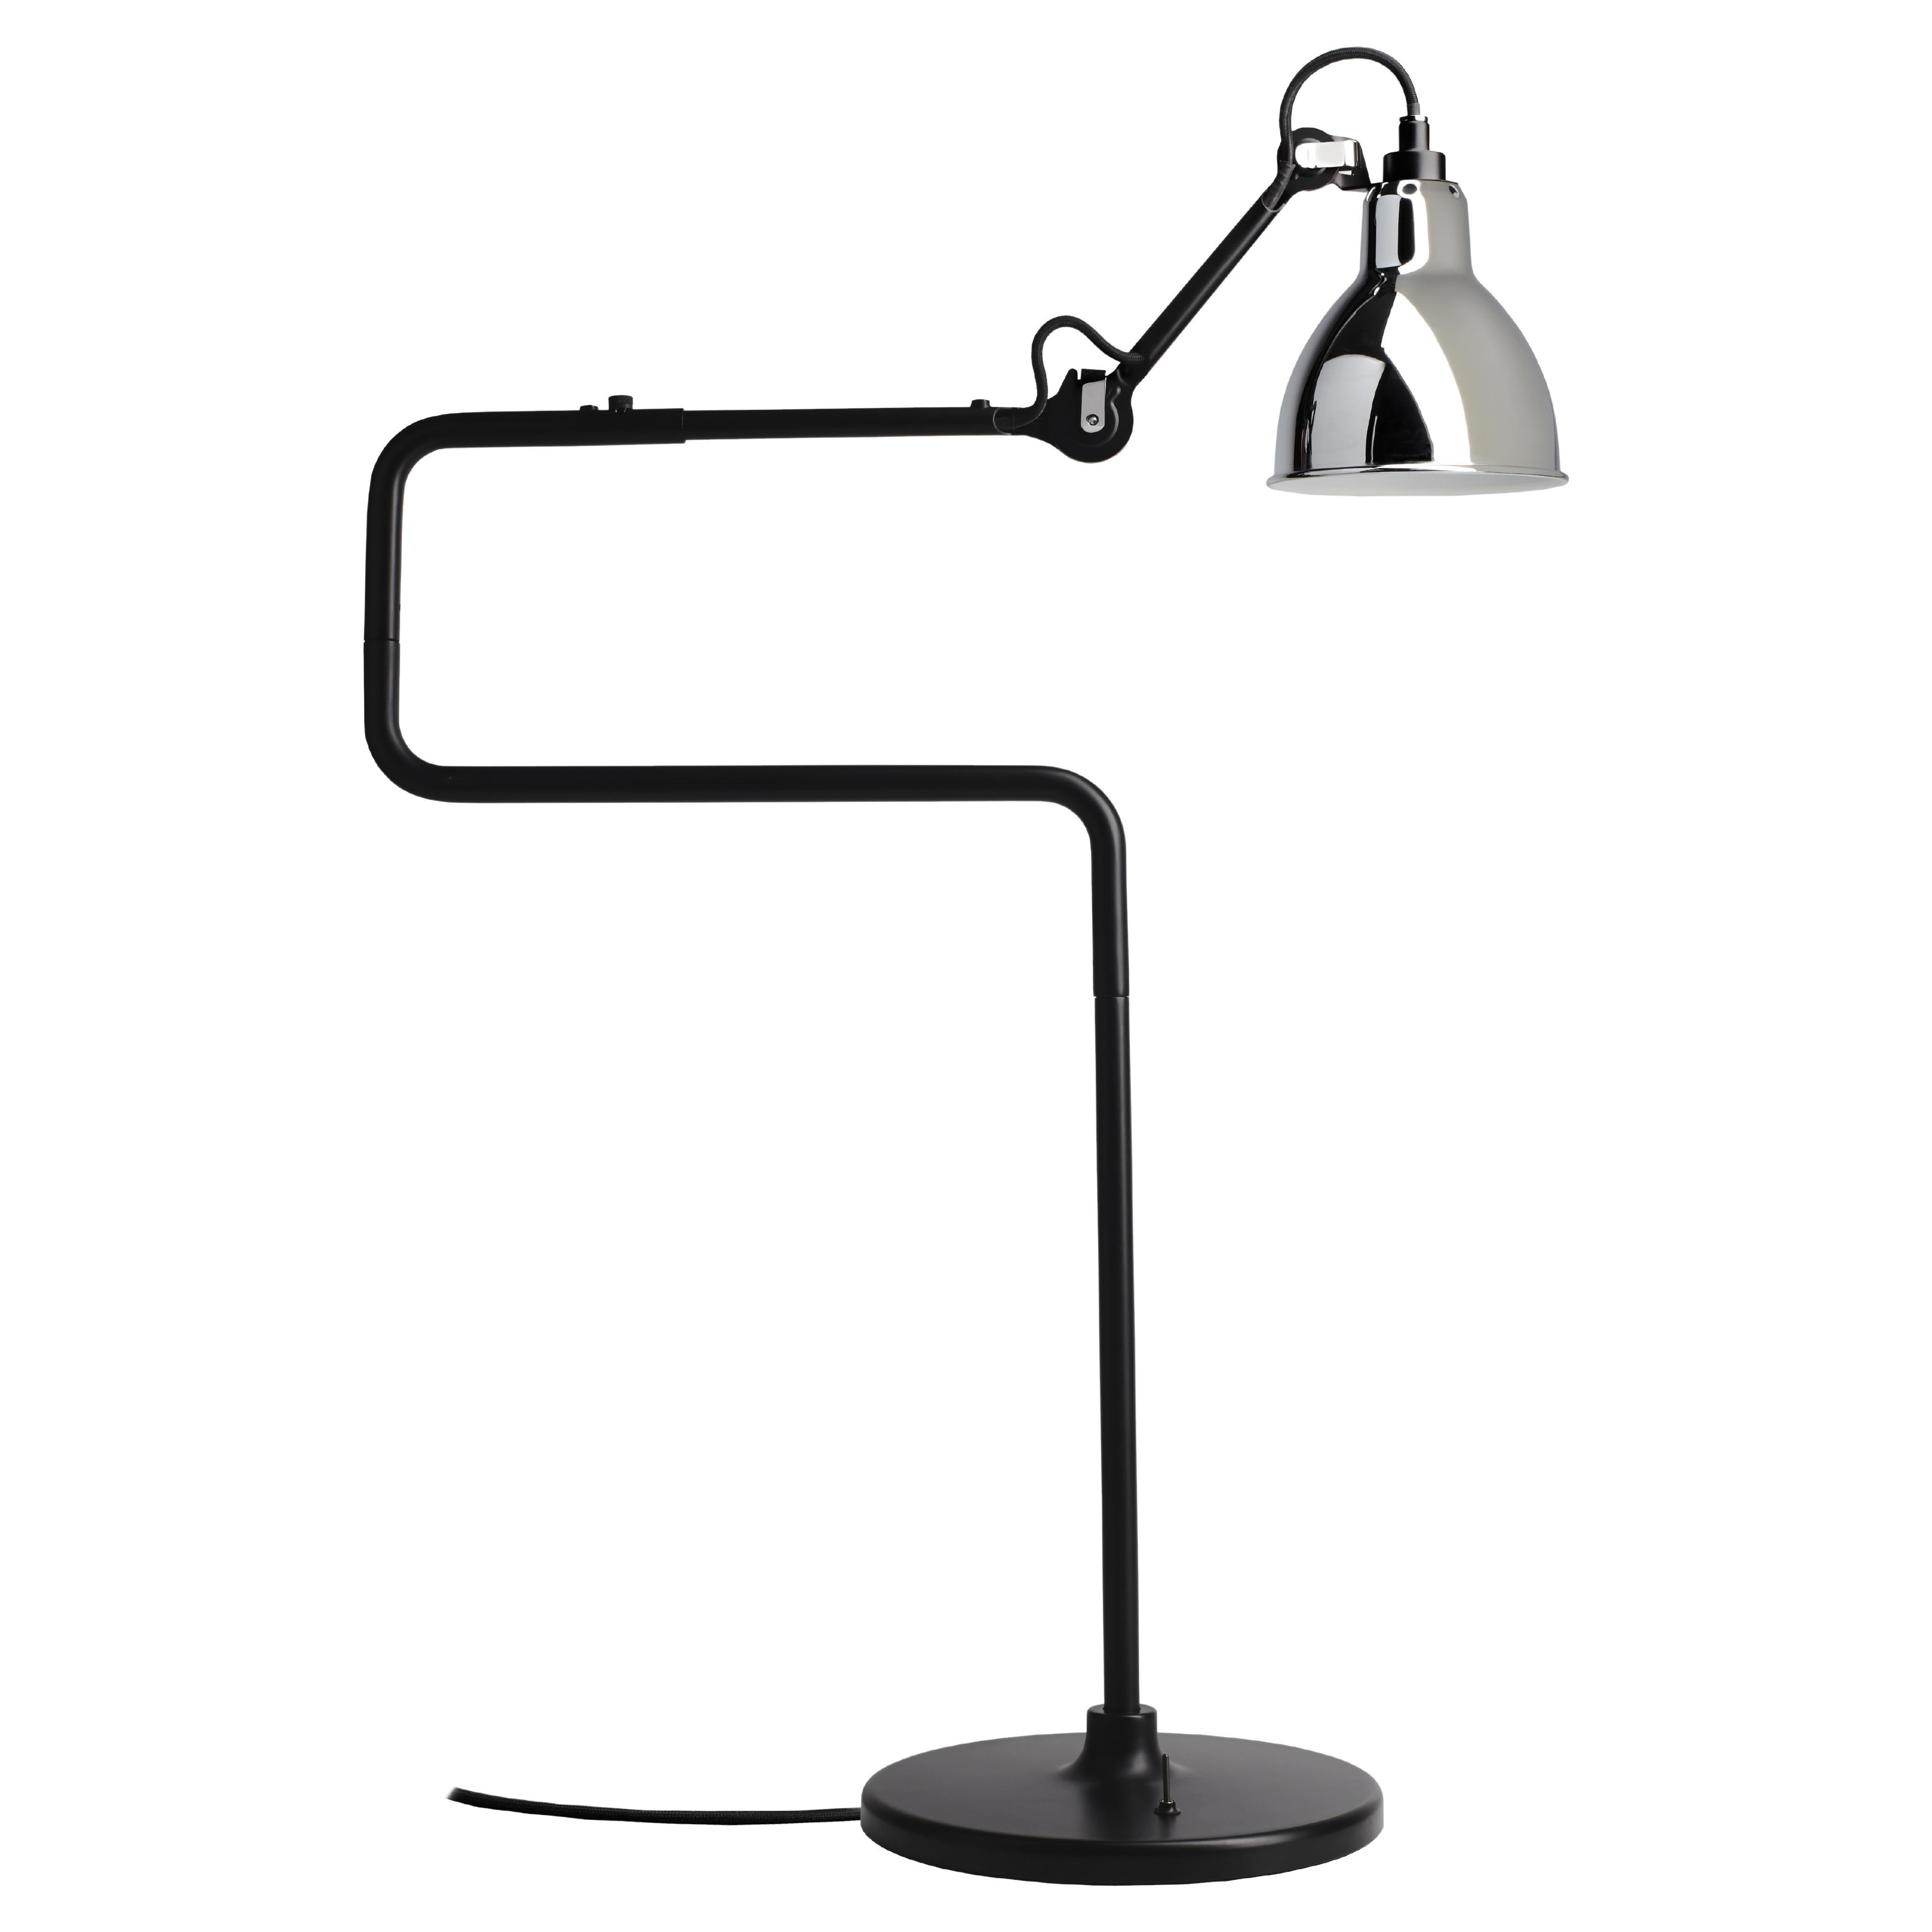 DCW Editions La Lampe Gras N°317 Table Lamp in Black Arm with Chrome Shade For Sale